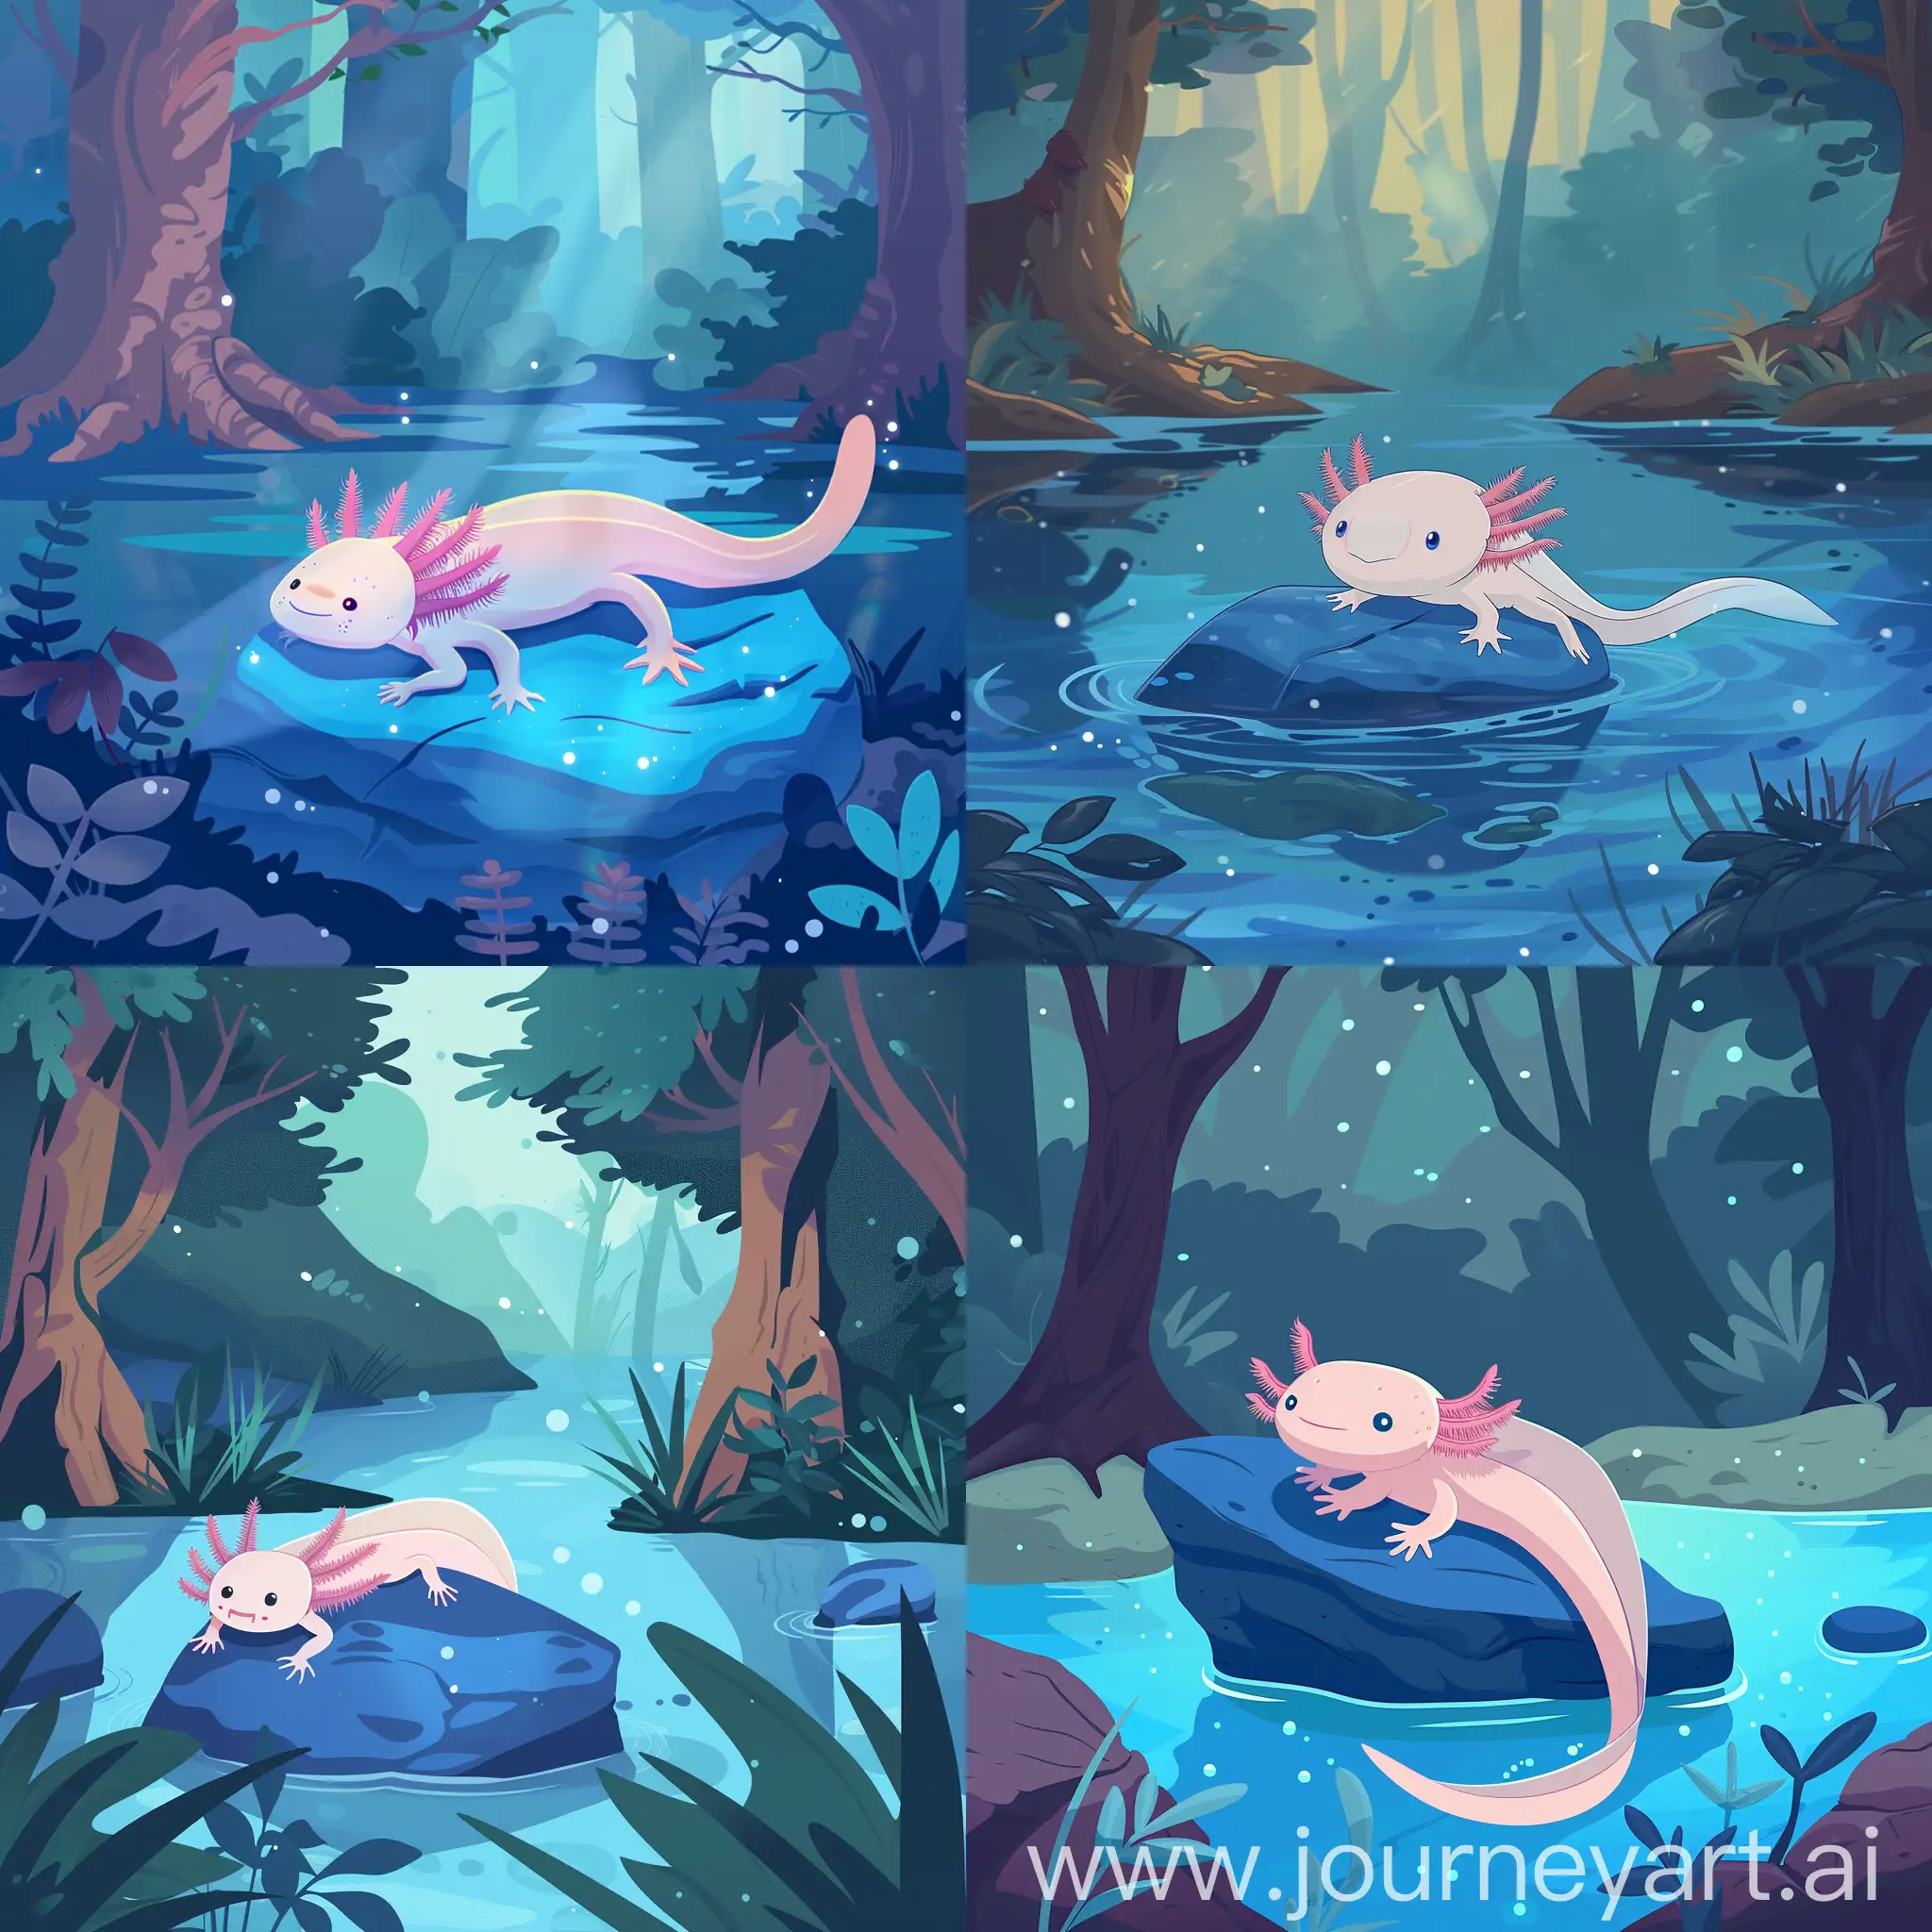 Sparkling-Blue-Forest-Lake-Axolotl-in-Cartoon-Flat-Style